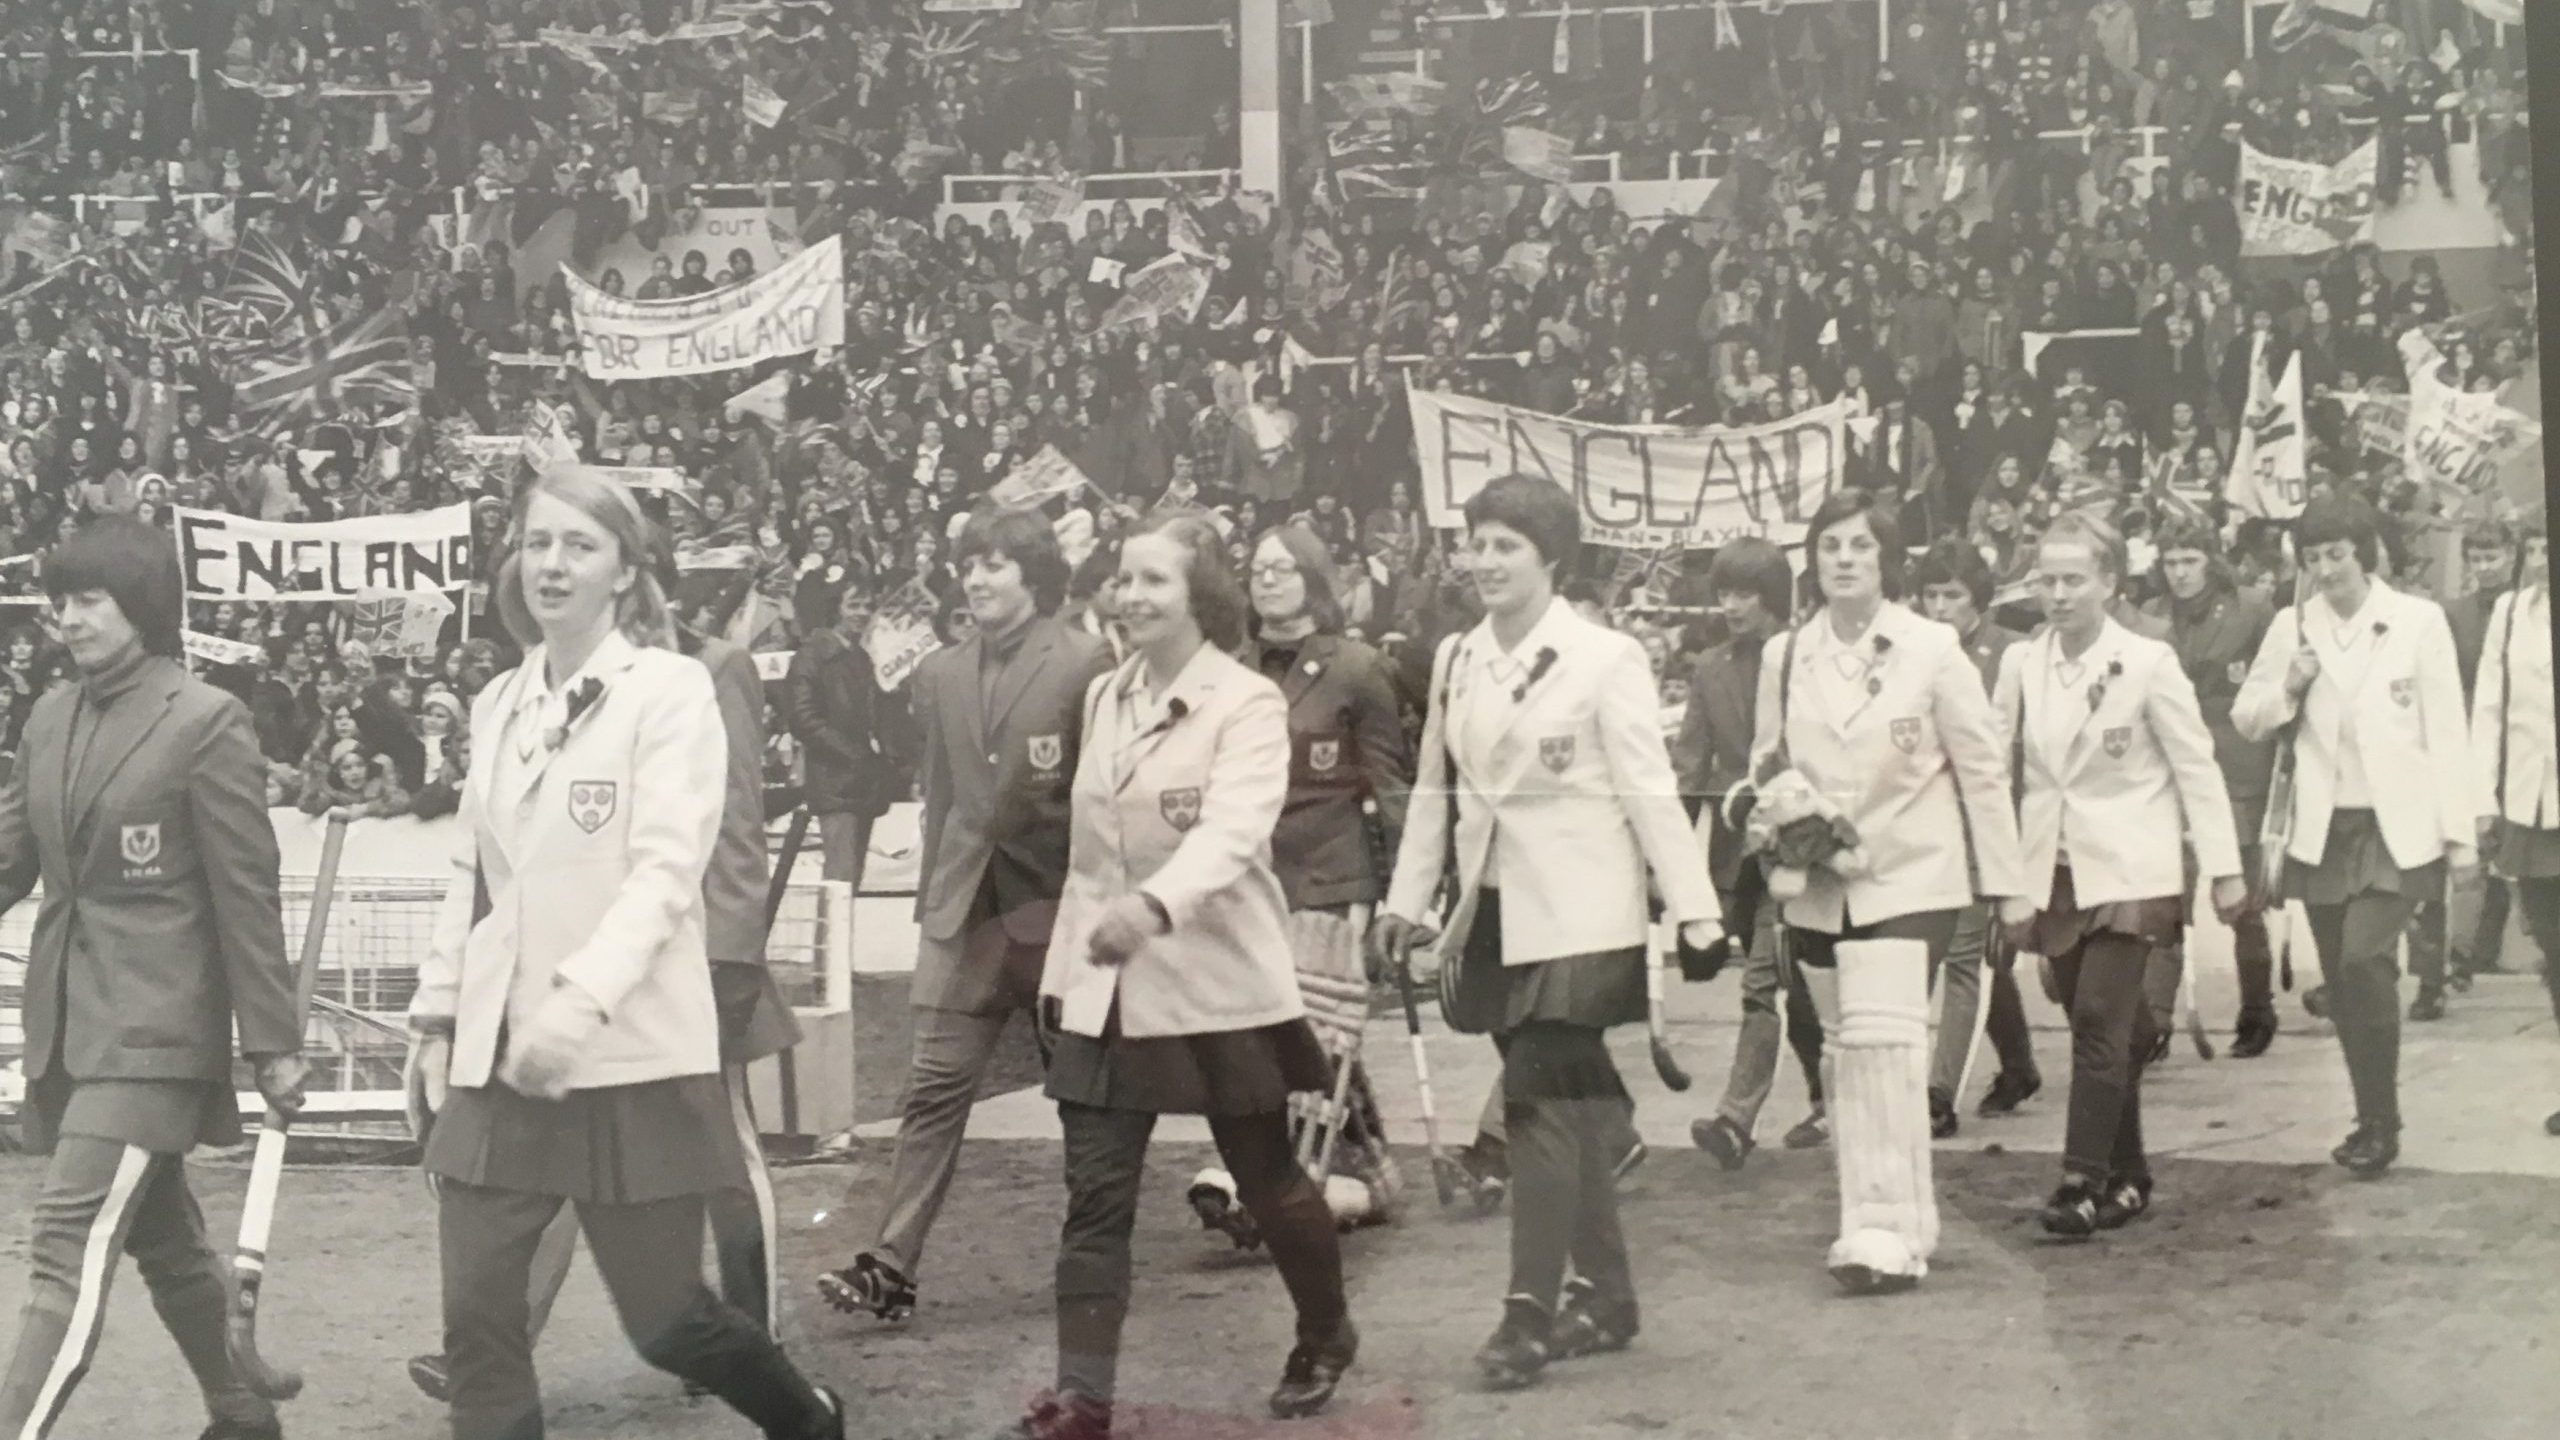 England hockey captain Anita White leading out the England women's hockey team at the 1975 World Cup